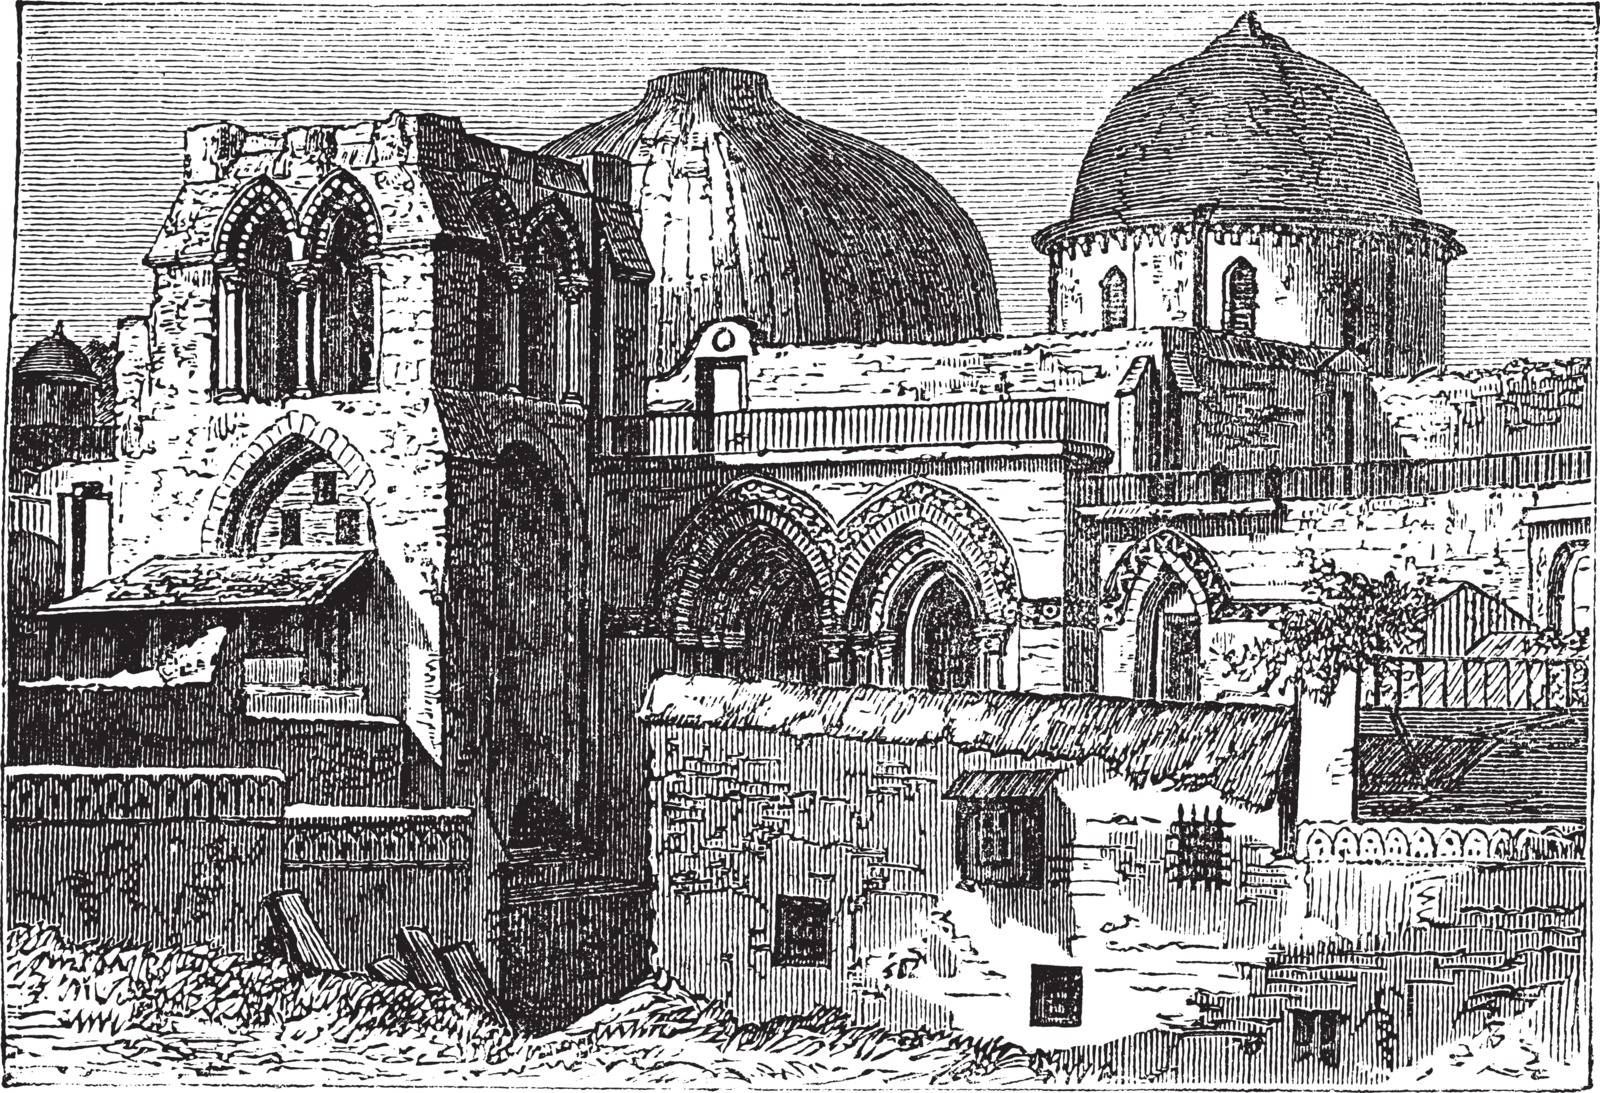 Church of the Holy Sepulchre or Church of the Resurrection in Jerusalem, Israel, during the 1890s, vintage engraving. Old engraved illustration of Church of the Holy Sepulchre.